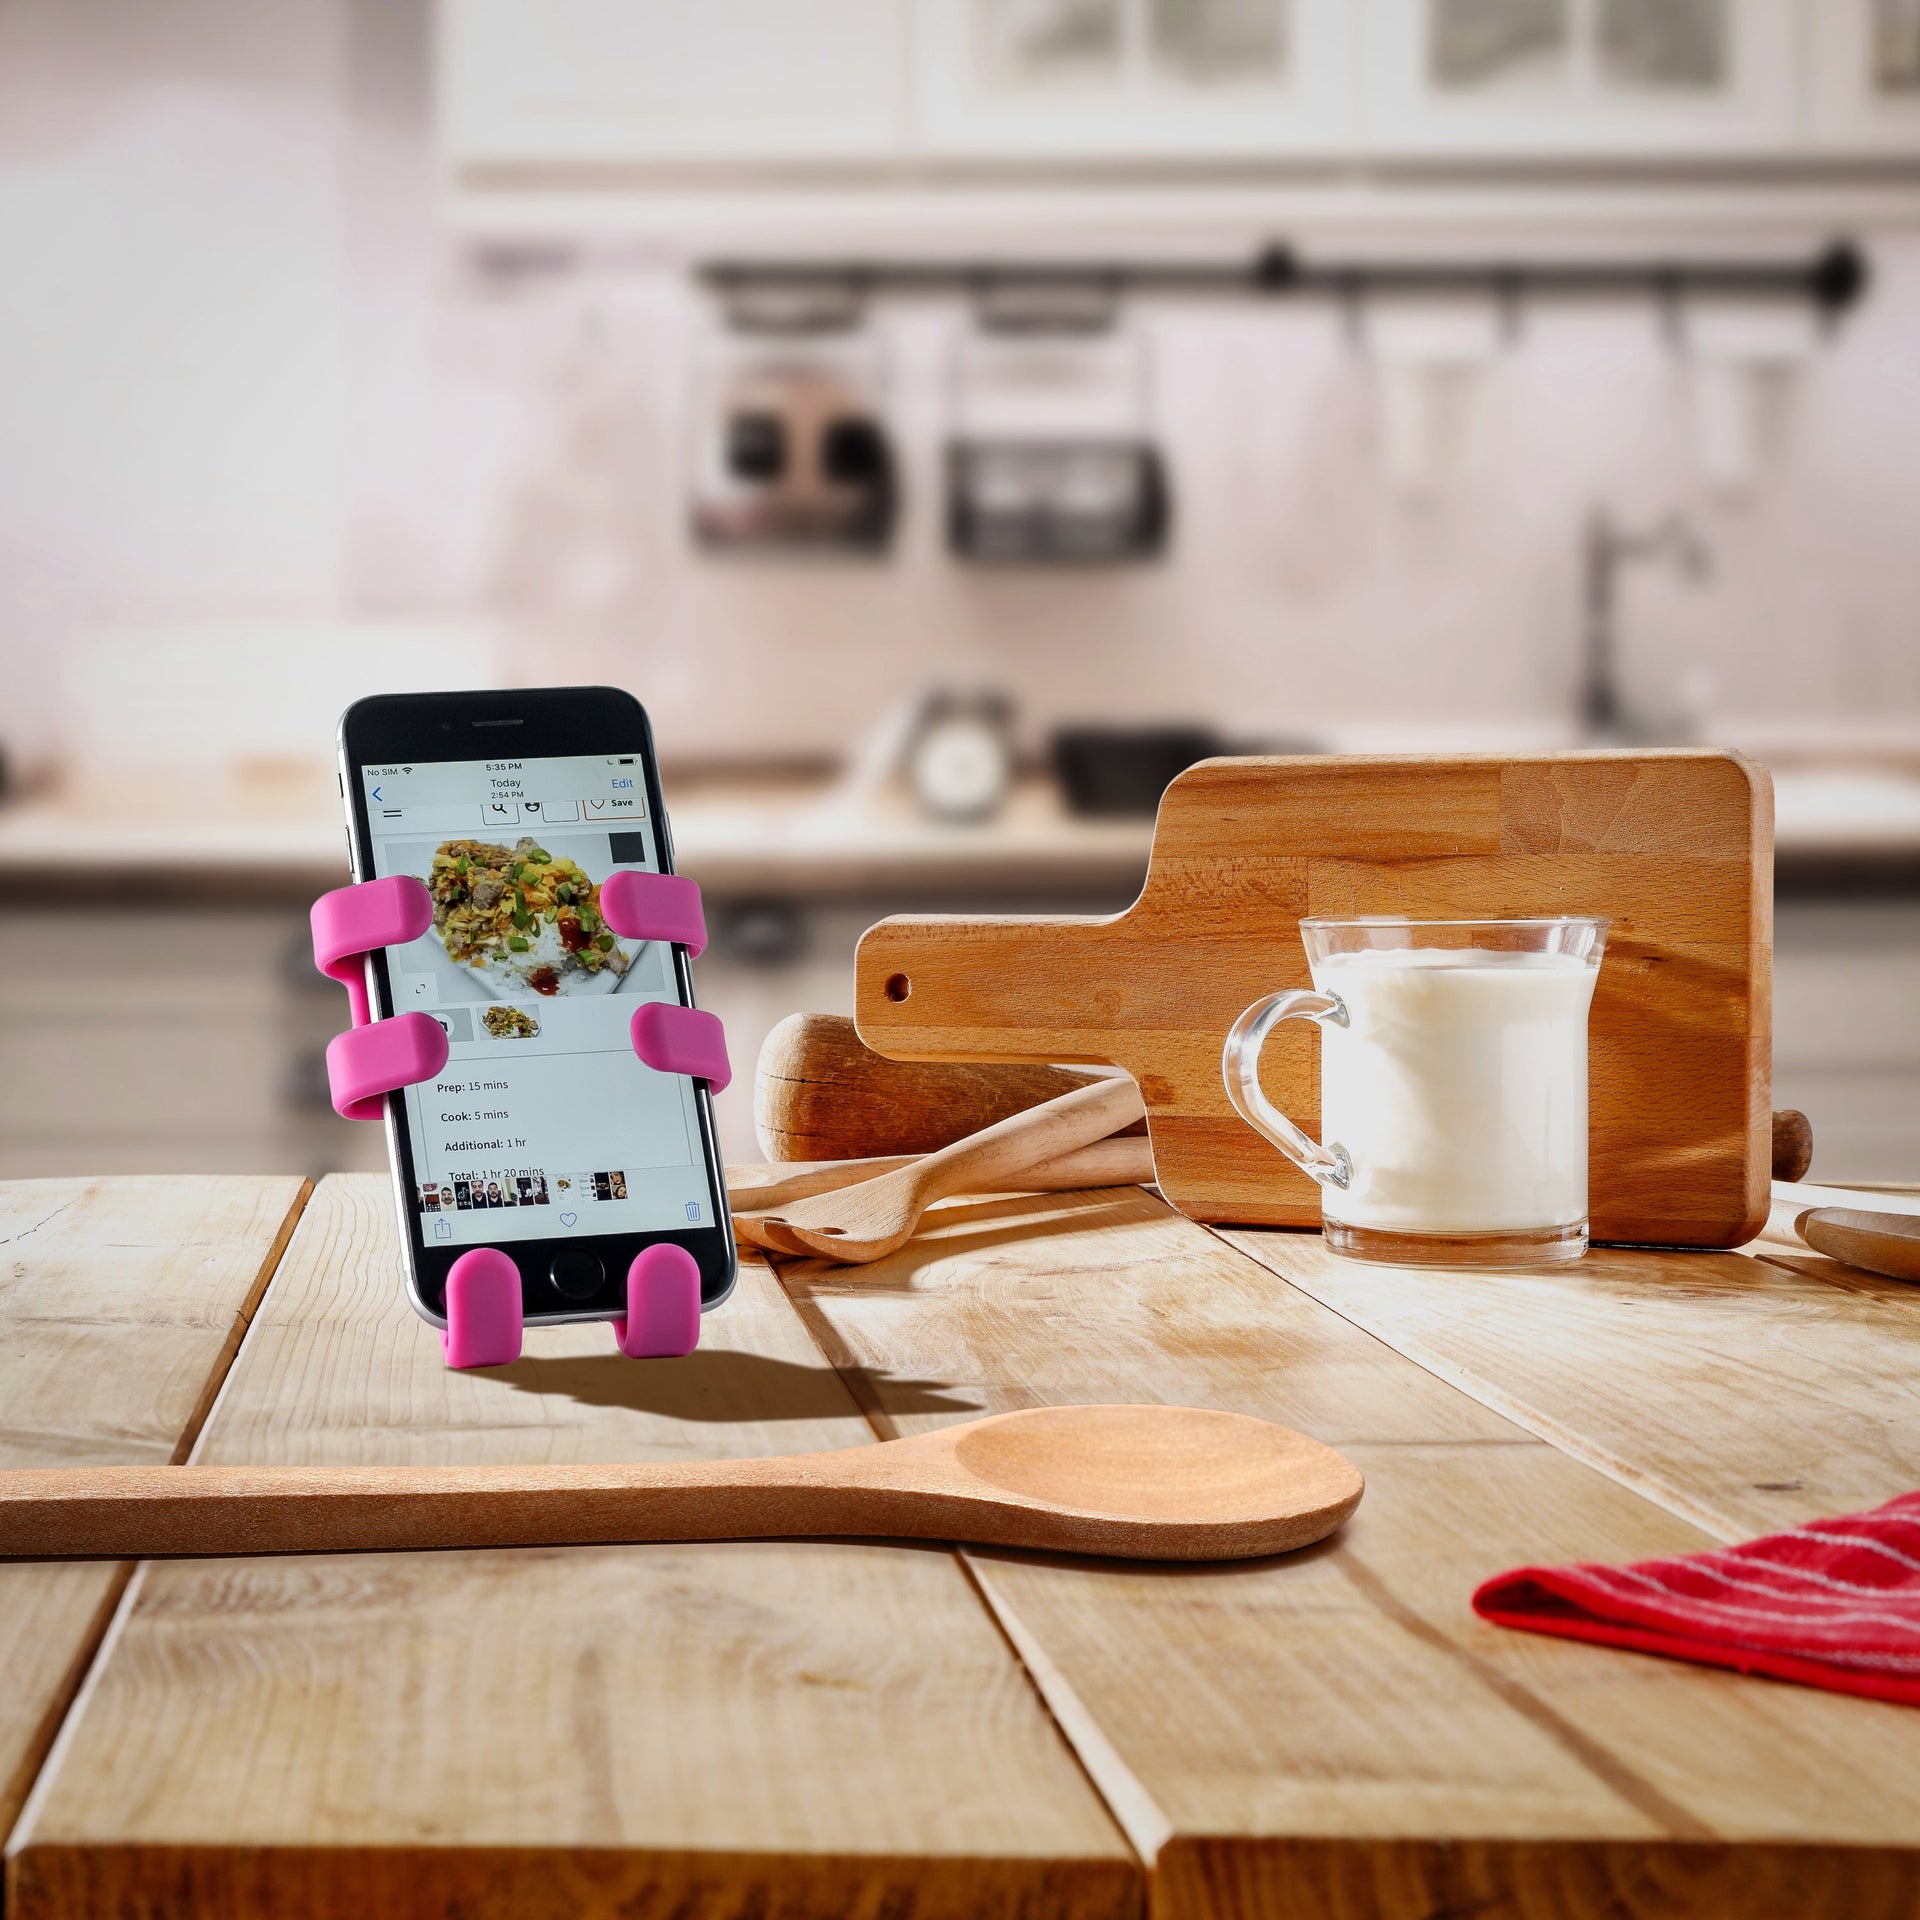 Image of OG Pink Hug Buddy holding a cell-phone with a recipe displayed on screen, on top of a kitchen counter surrounded by cooking utensils and ingredients